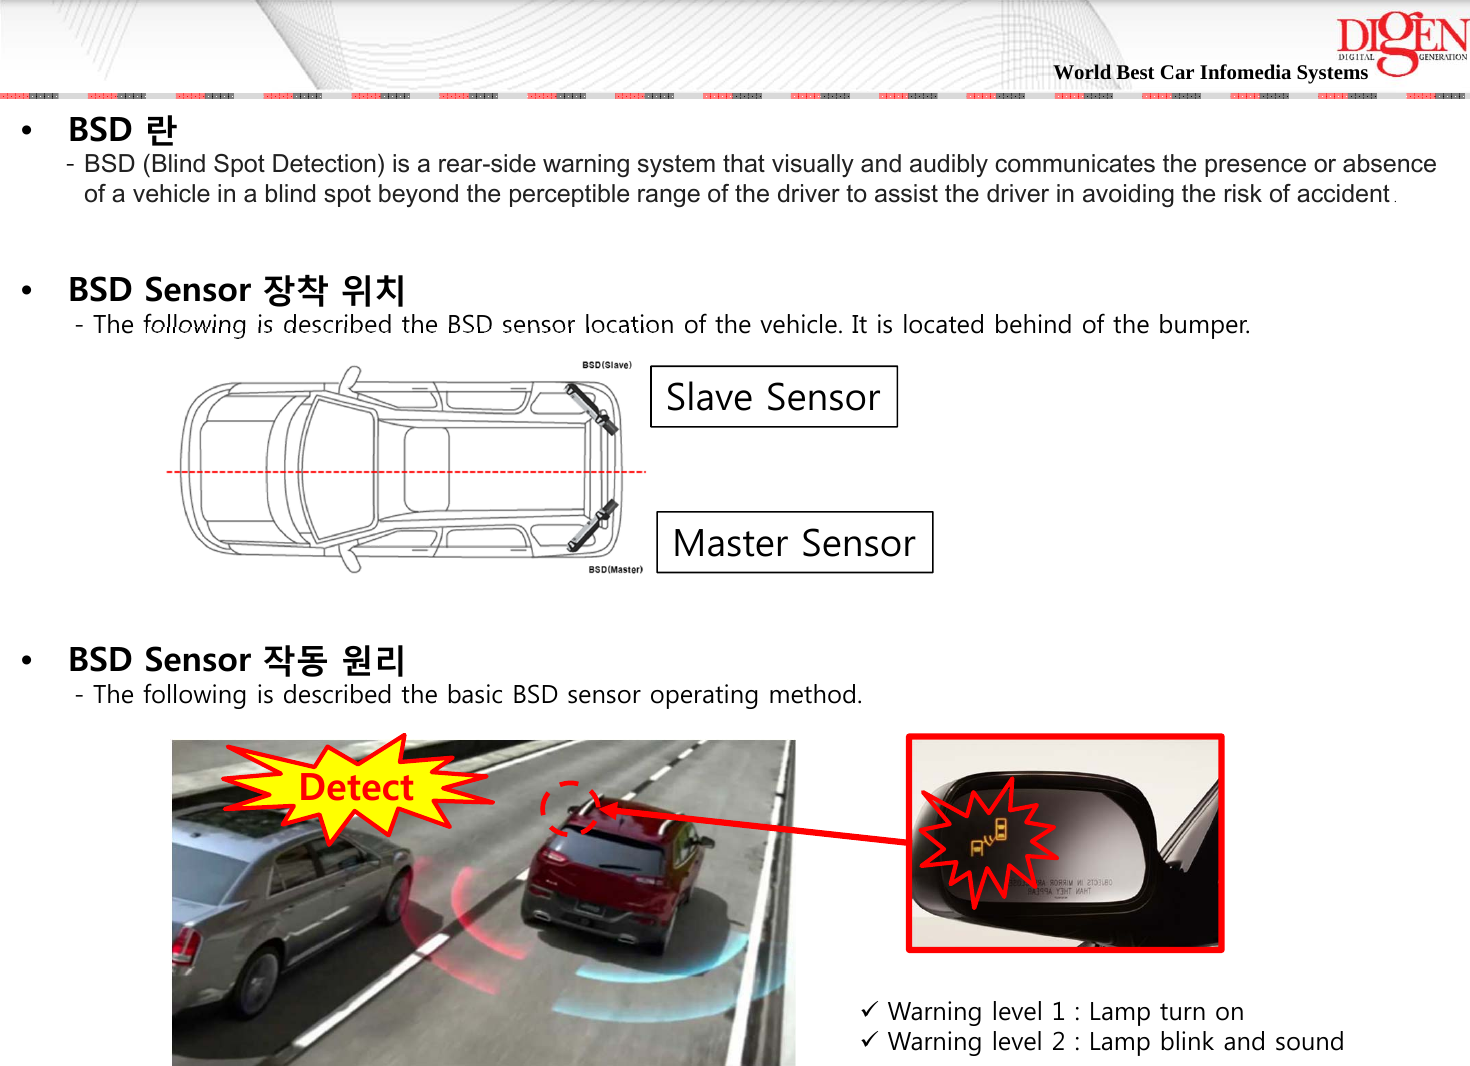 World Best Car Infomedia Systems •BSD 란-BSD (Blind Spot Detection) is a rear-side warning system that visually and audibly communicates the presence or absenceof a vehicle in a blind spot beyond the perceptible range of the driver to assist the driver in avoiding the risk of accident .•BSD Sensor 장착 위치- The following is described the BSD sensor location of the vehicle. It is located behind of the bumper.•BSD Sensor 작동 원리- The following is described the basic BSD sensor operating method.DetectWarning level 1 : Lamp turn onWarning level 2 : Lamp blink and soundMaster SensorSlave Sensor